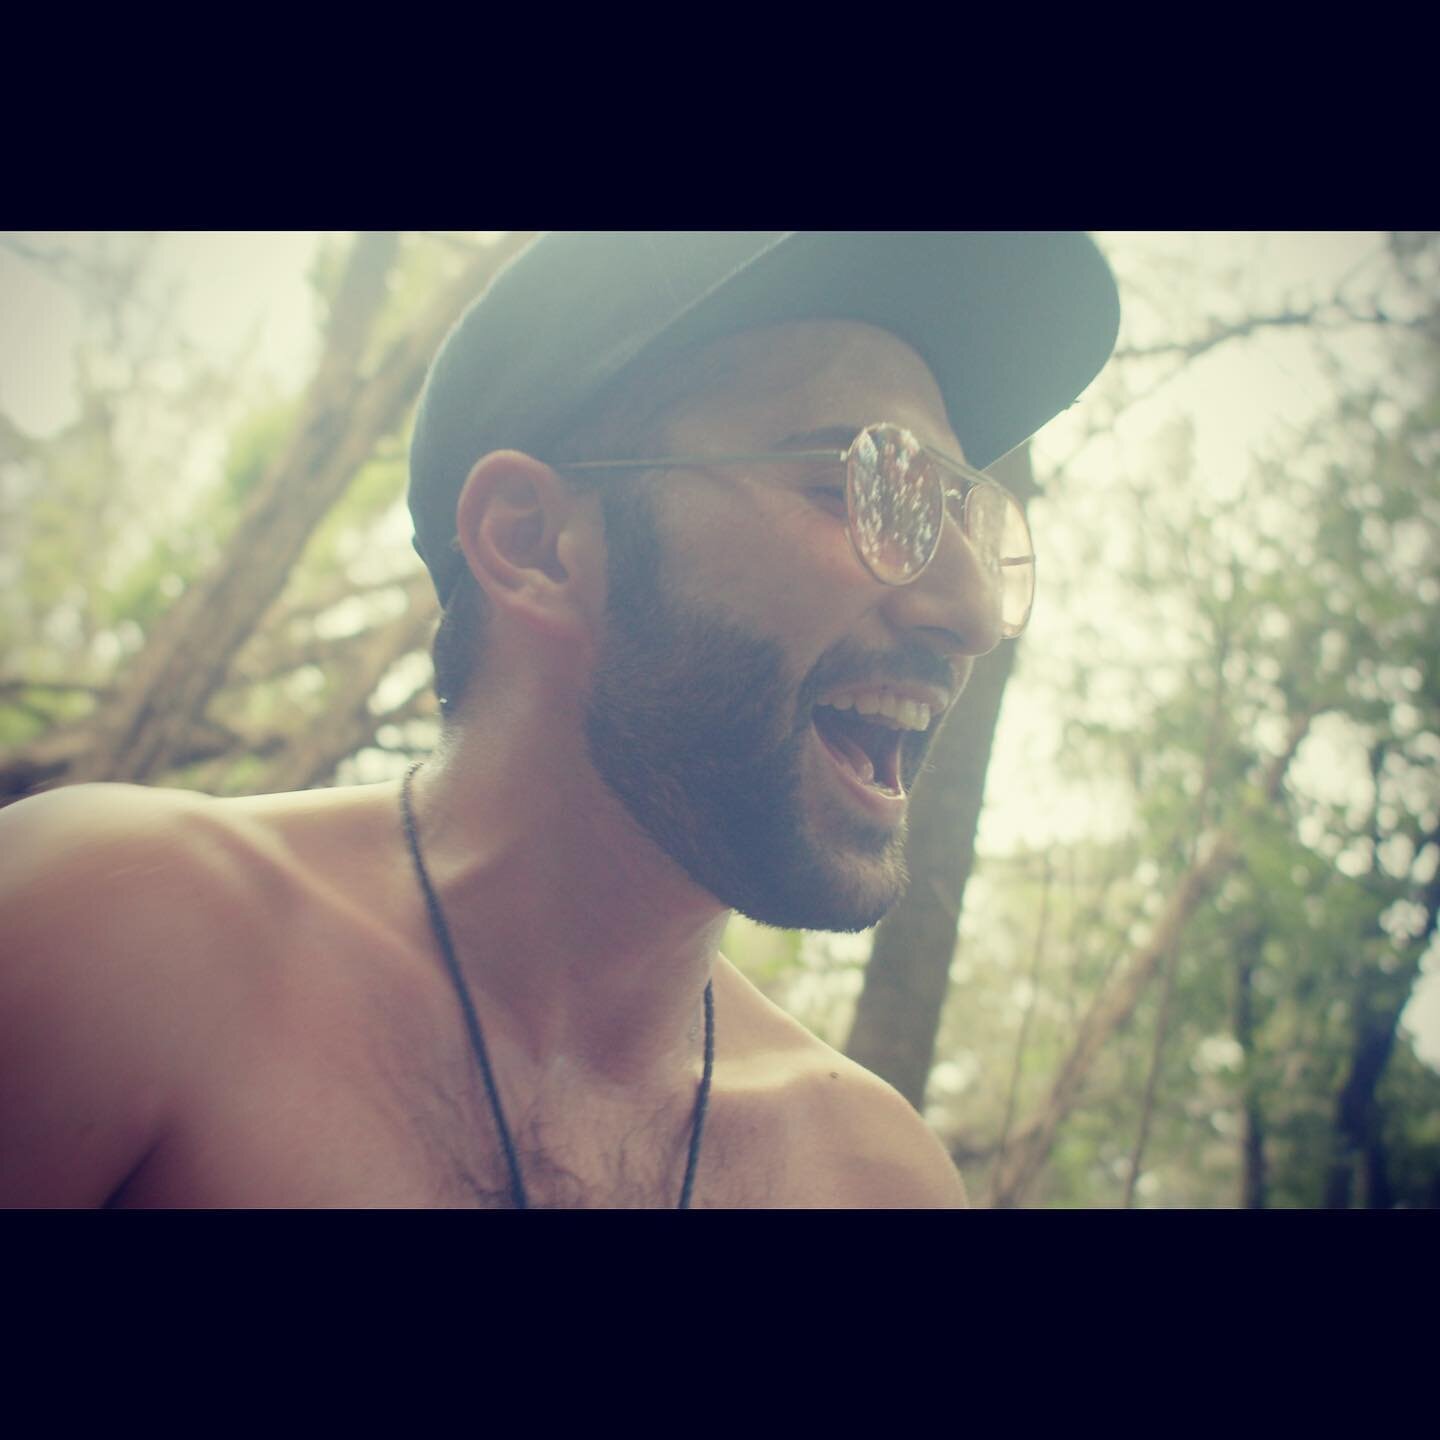 A few stills from the River City Hippie music video shoot. Thank you to everyone who came out and help - can't wait to show you guys what we made together🤩 The song AND video drop Friday August 27th - pre-save link in my bio 🔗 #austinmusic #austinm